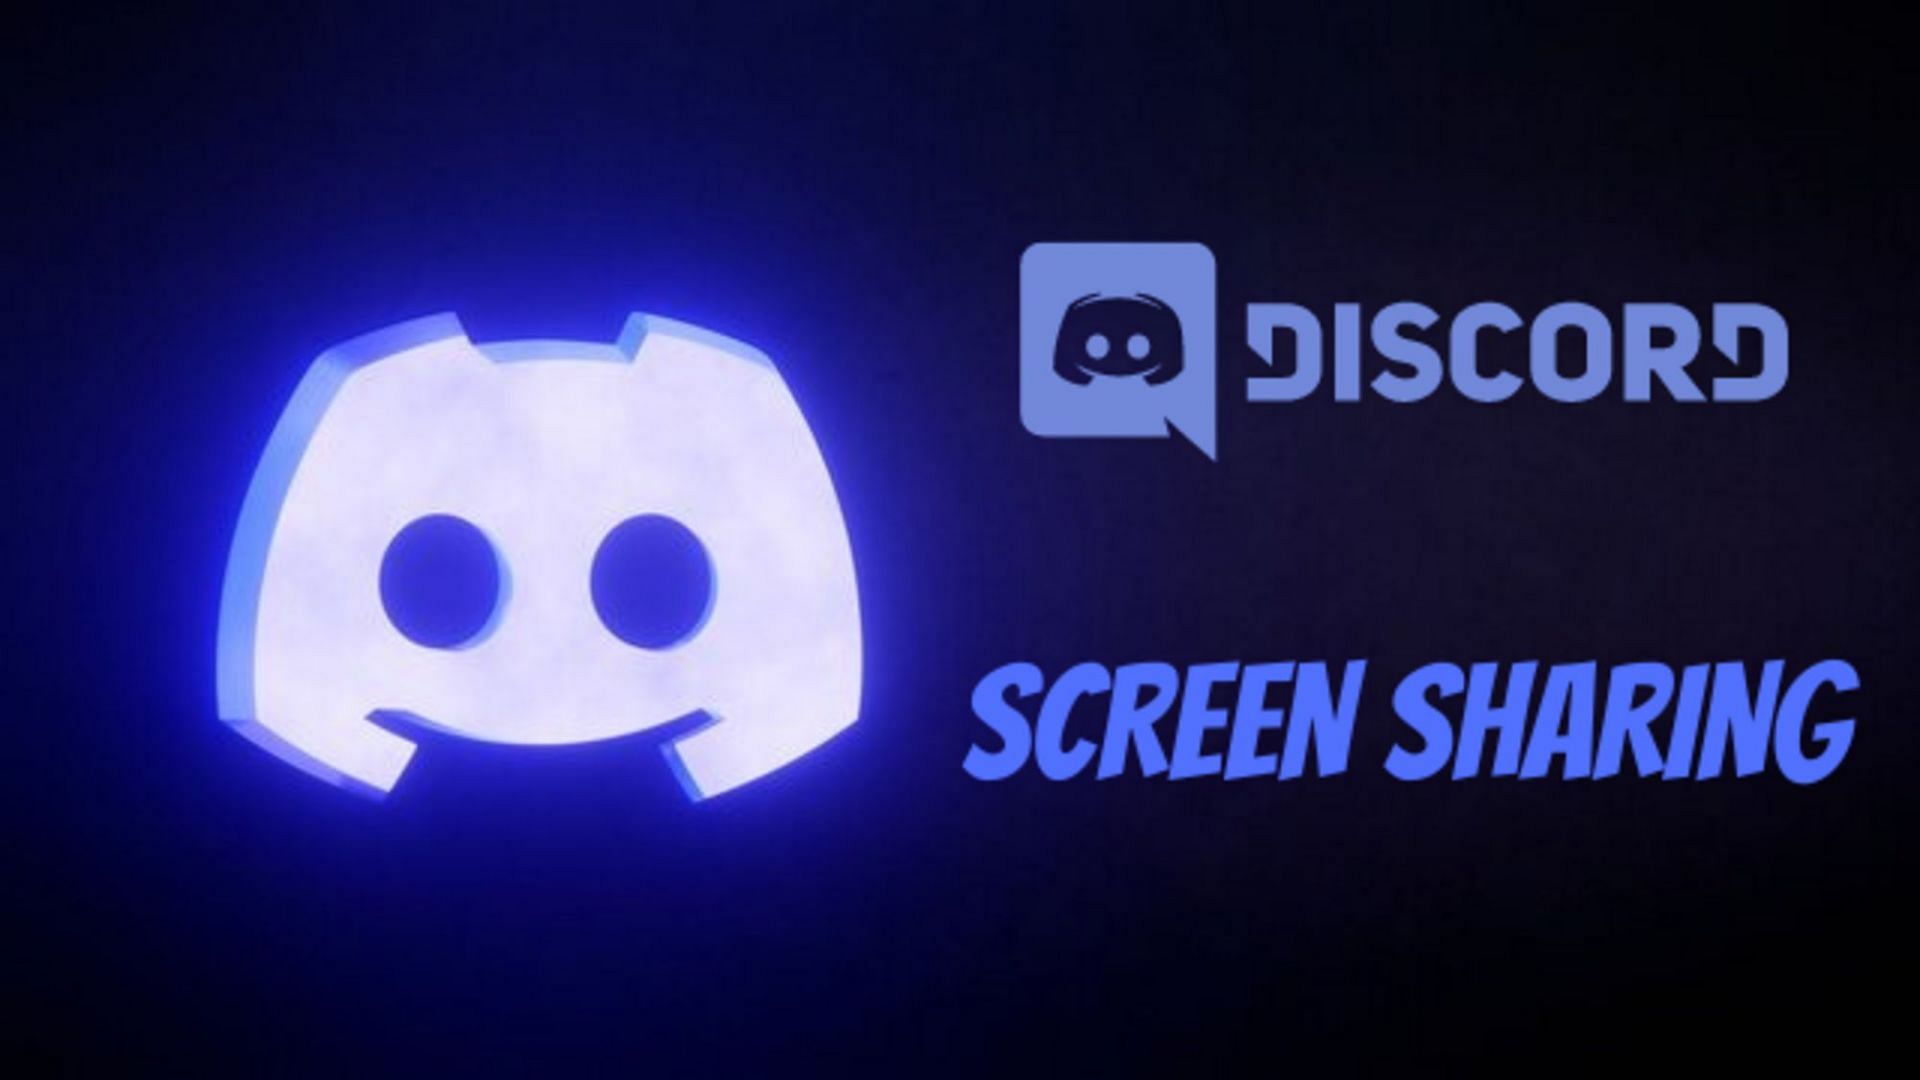 How To Screen Share On Discord